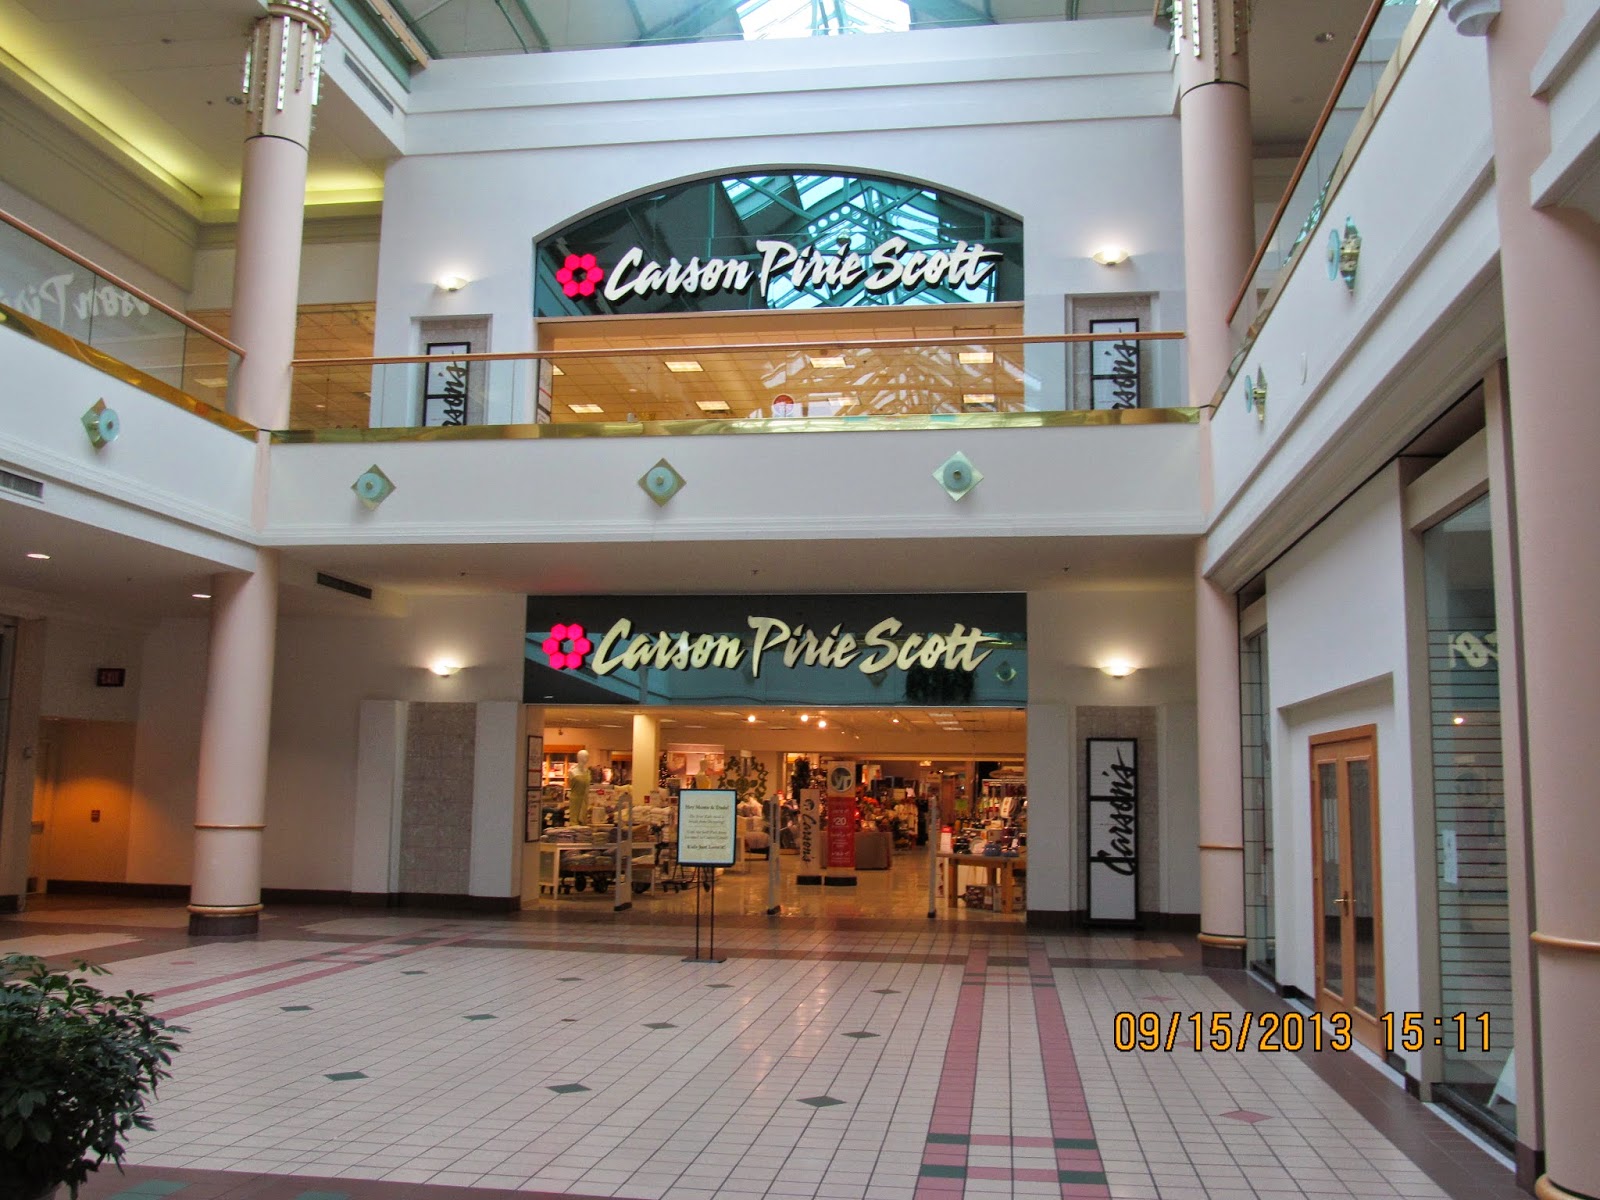 Trip to the Mall: Charlestowne Mall- (St. Charles, IL)